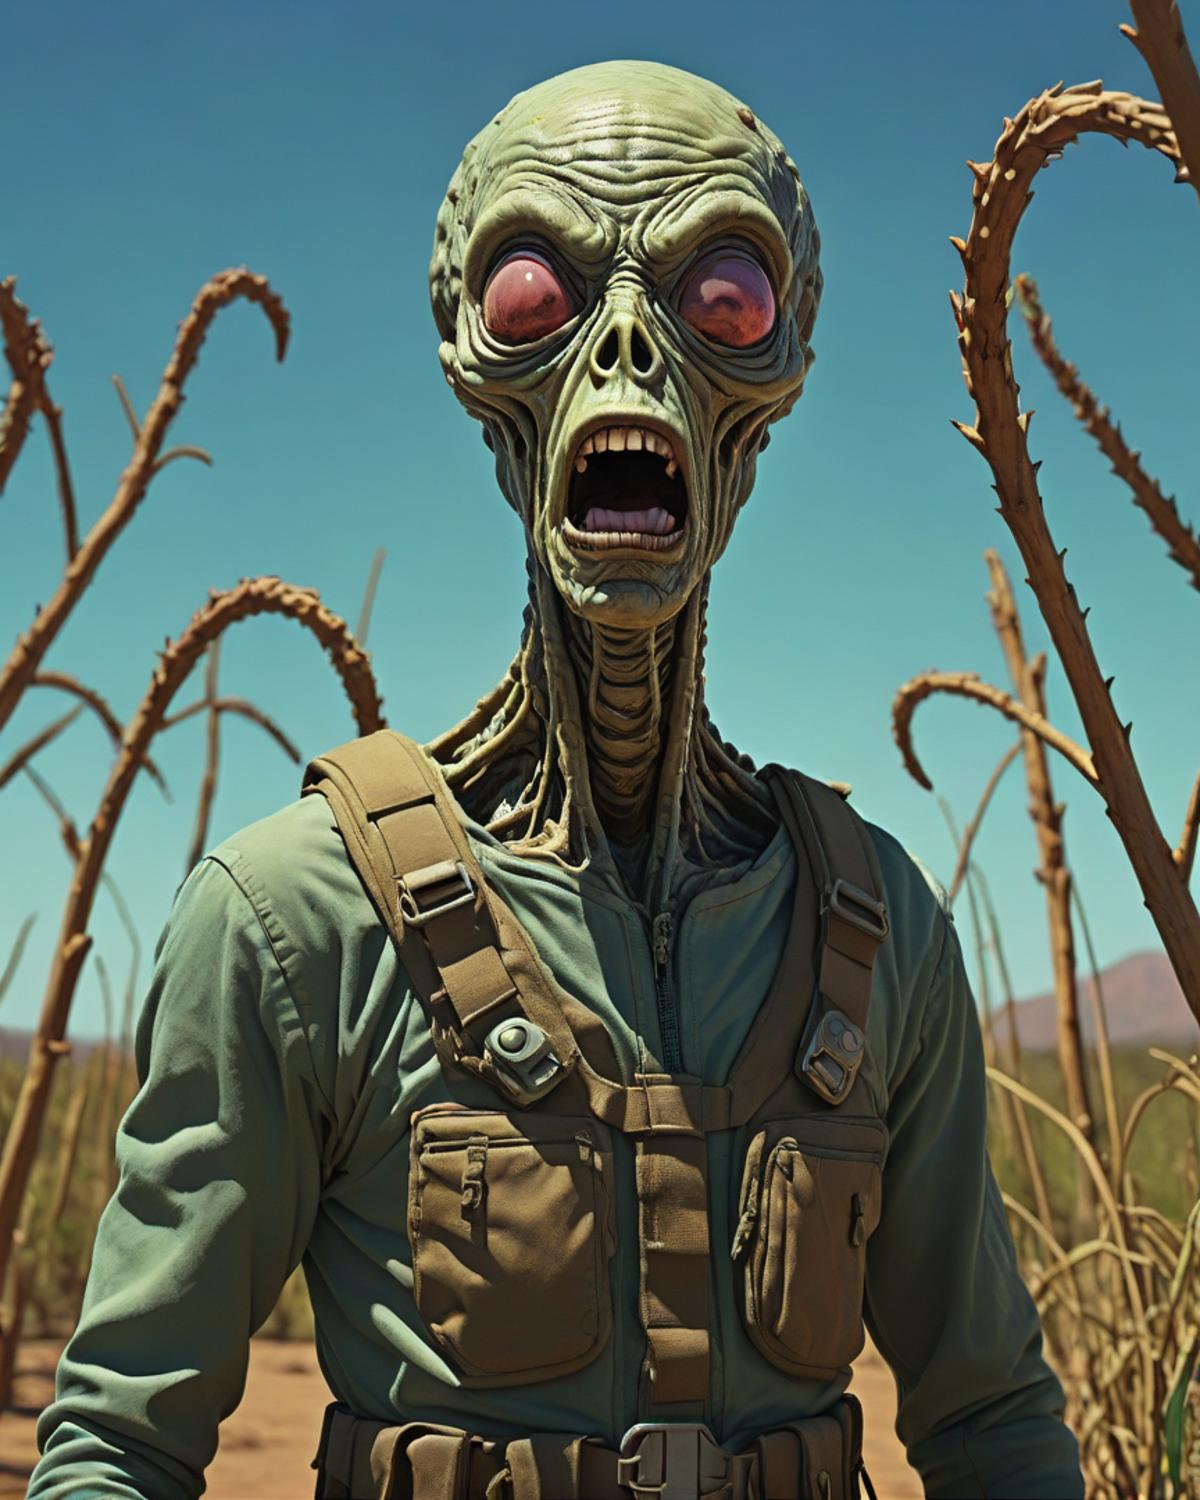 A monster with an open mouth, angry expression and wearing a backpack stands in a field.